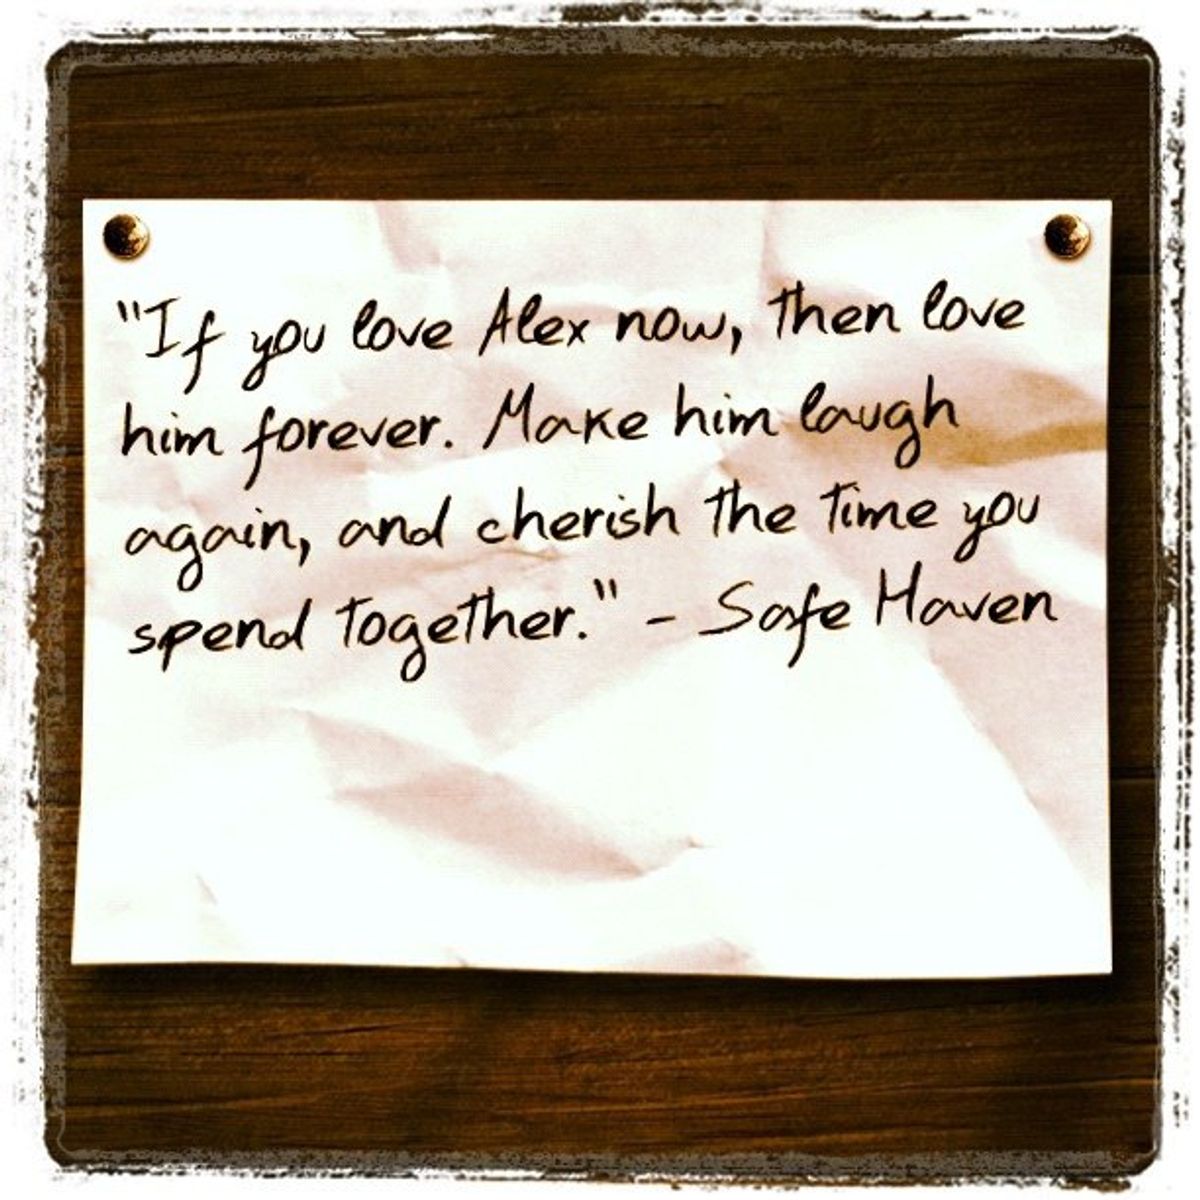 'Safe Haven' quotes